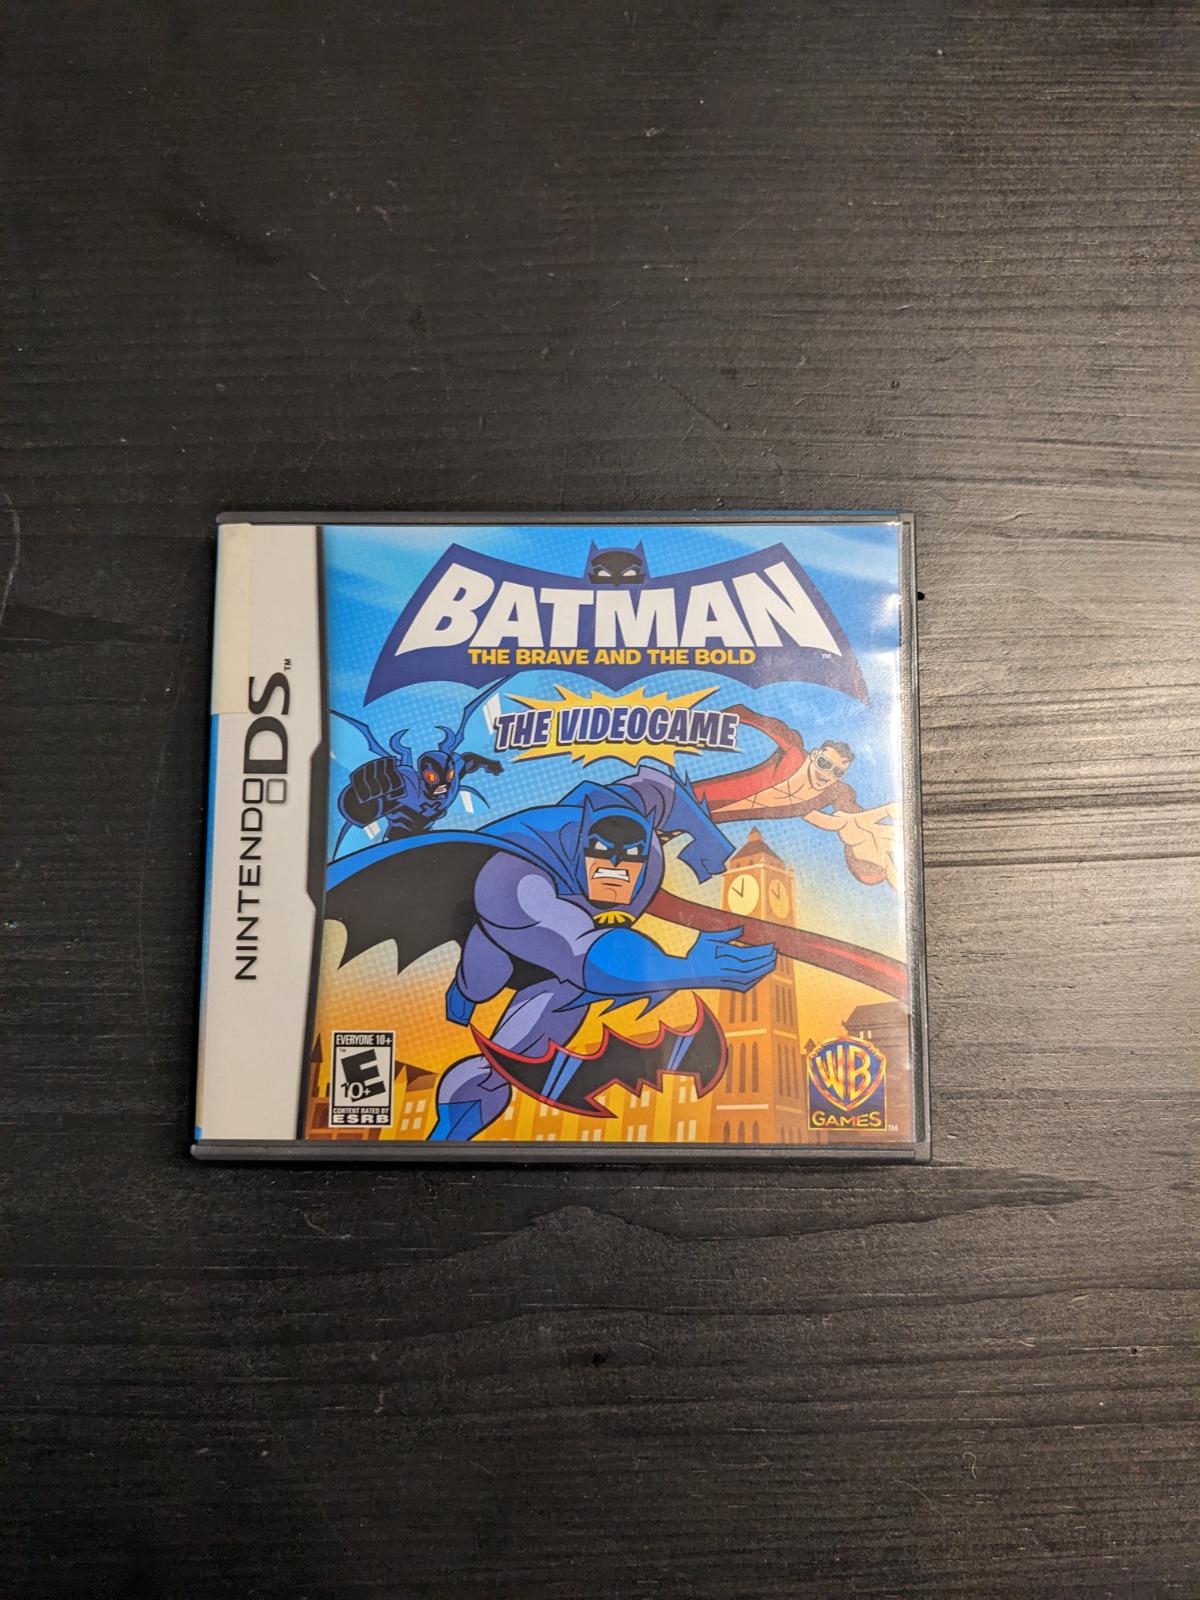 batman-the-brave-and-the-bold-item-box-and-manual-nintendo-ds